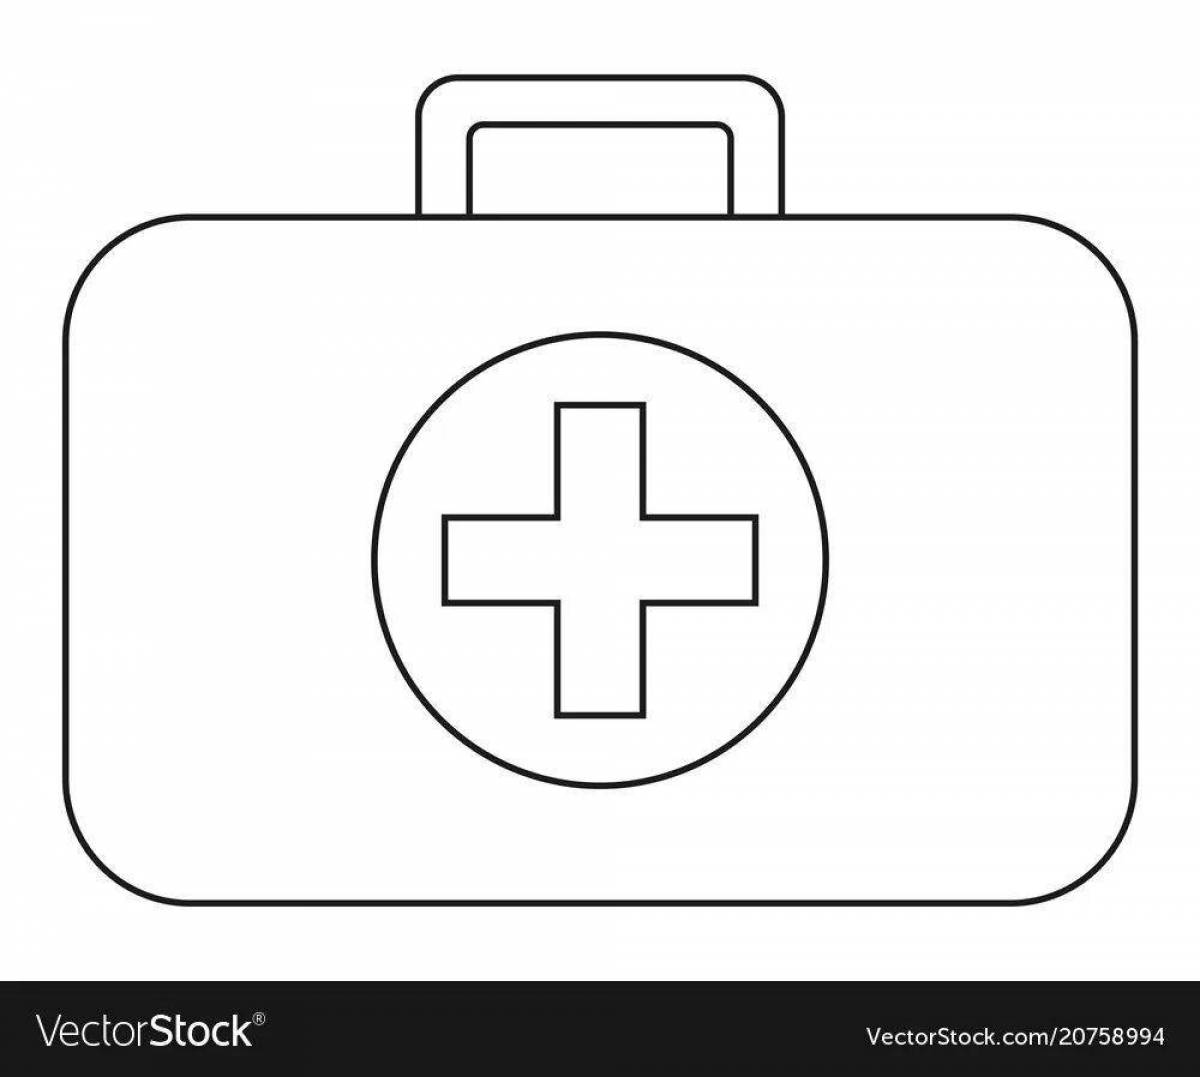 Coloring page glowing medical aid sign